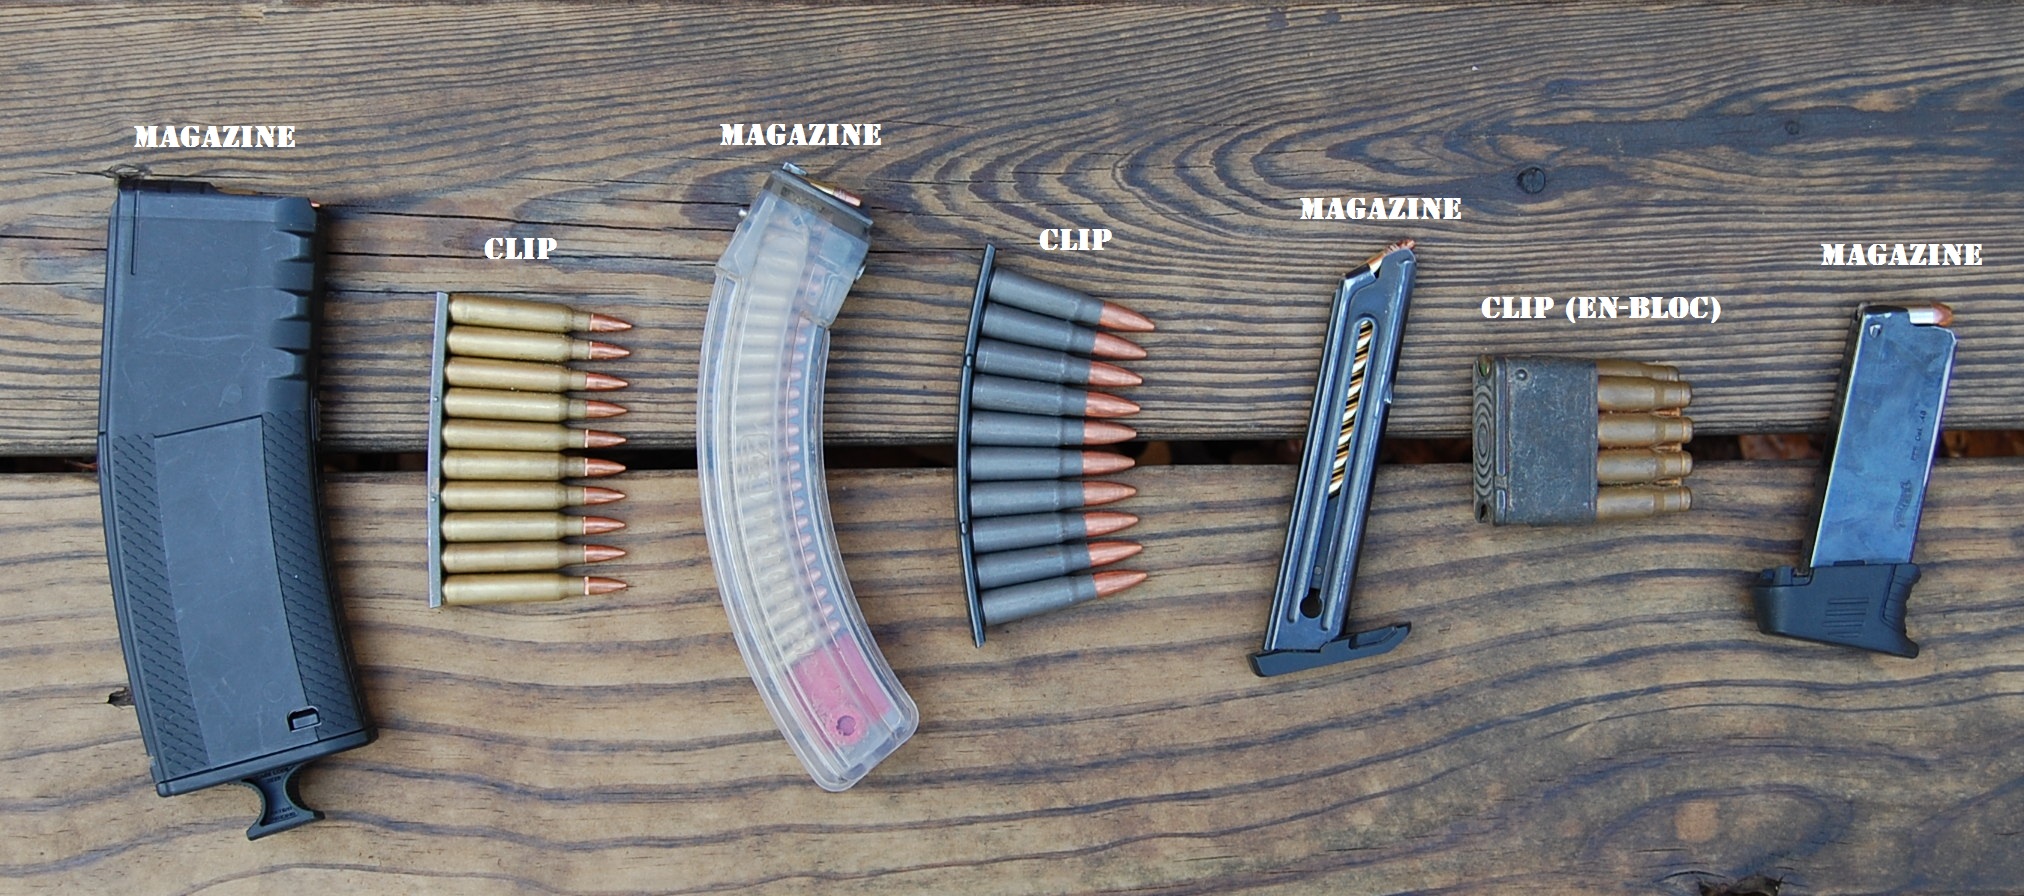 Detachable box magazines are what most modern firearms store their bullets ...